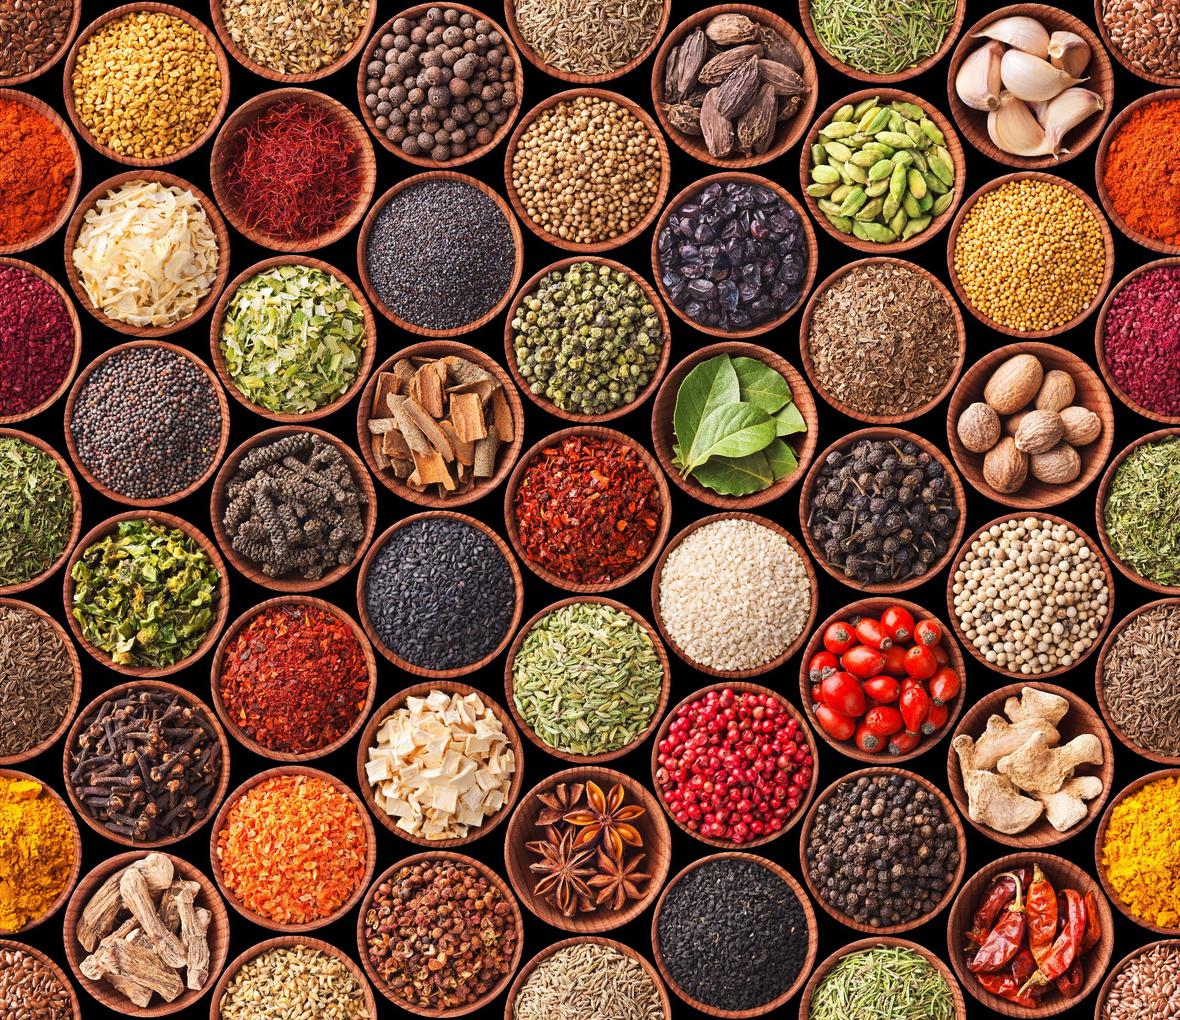 A large variety of colorful spices and herbs in bowls